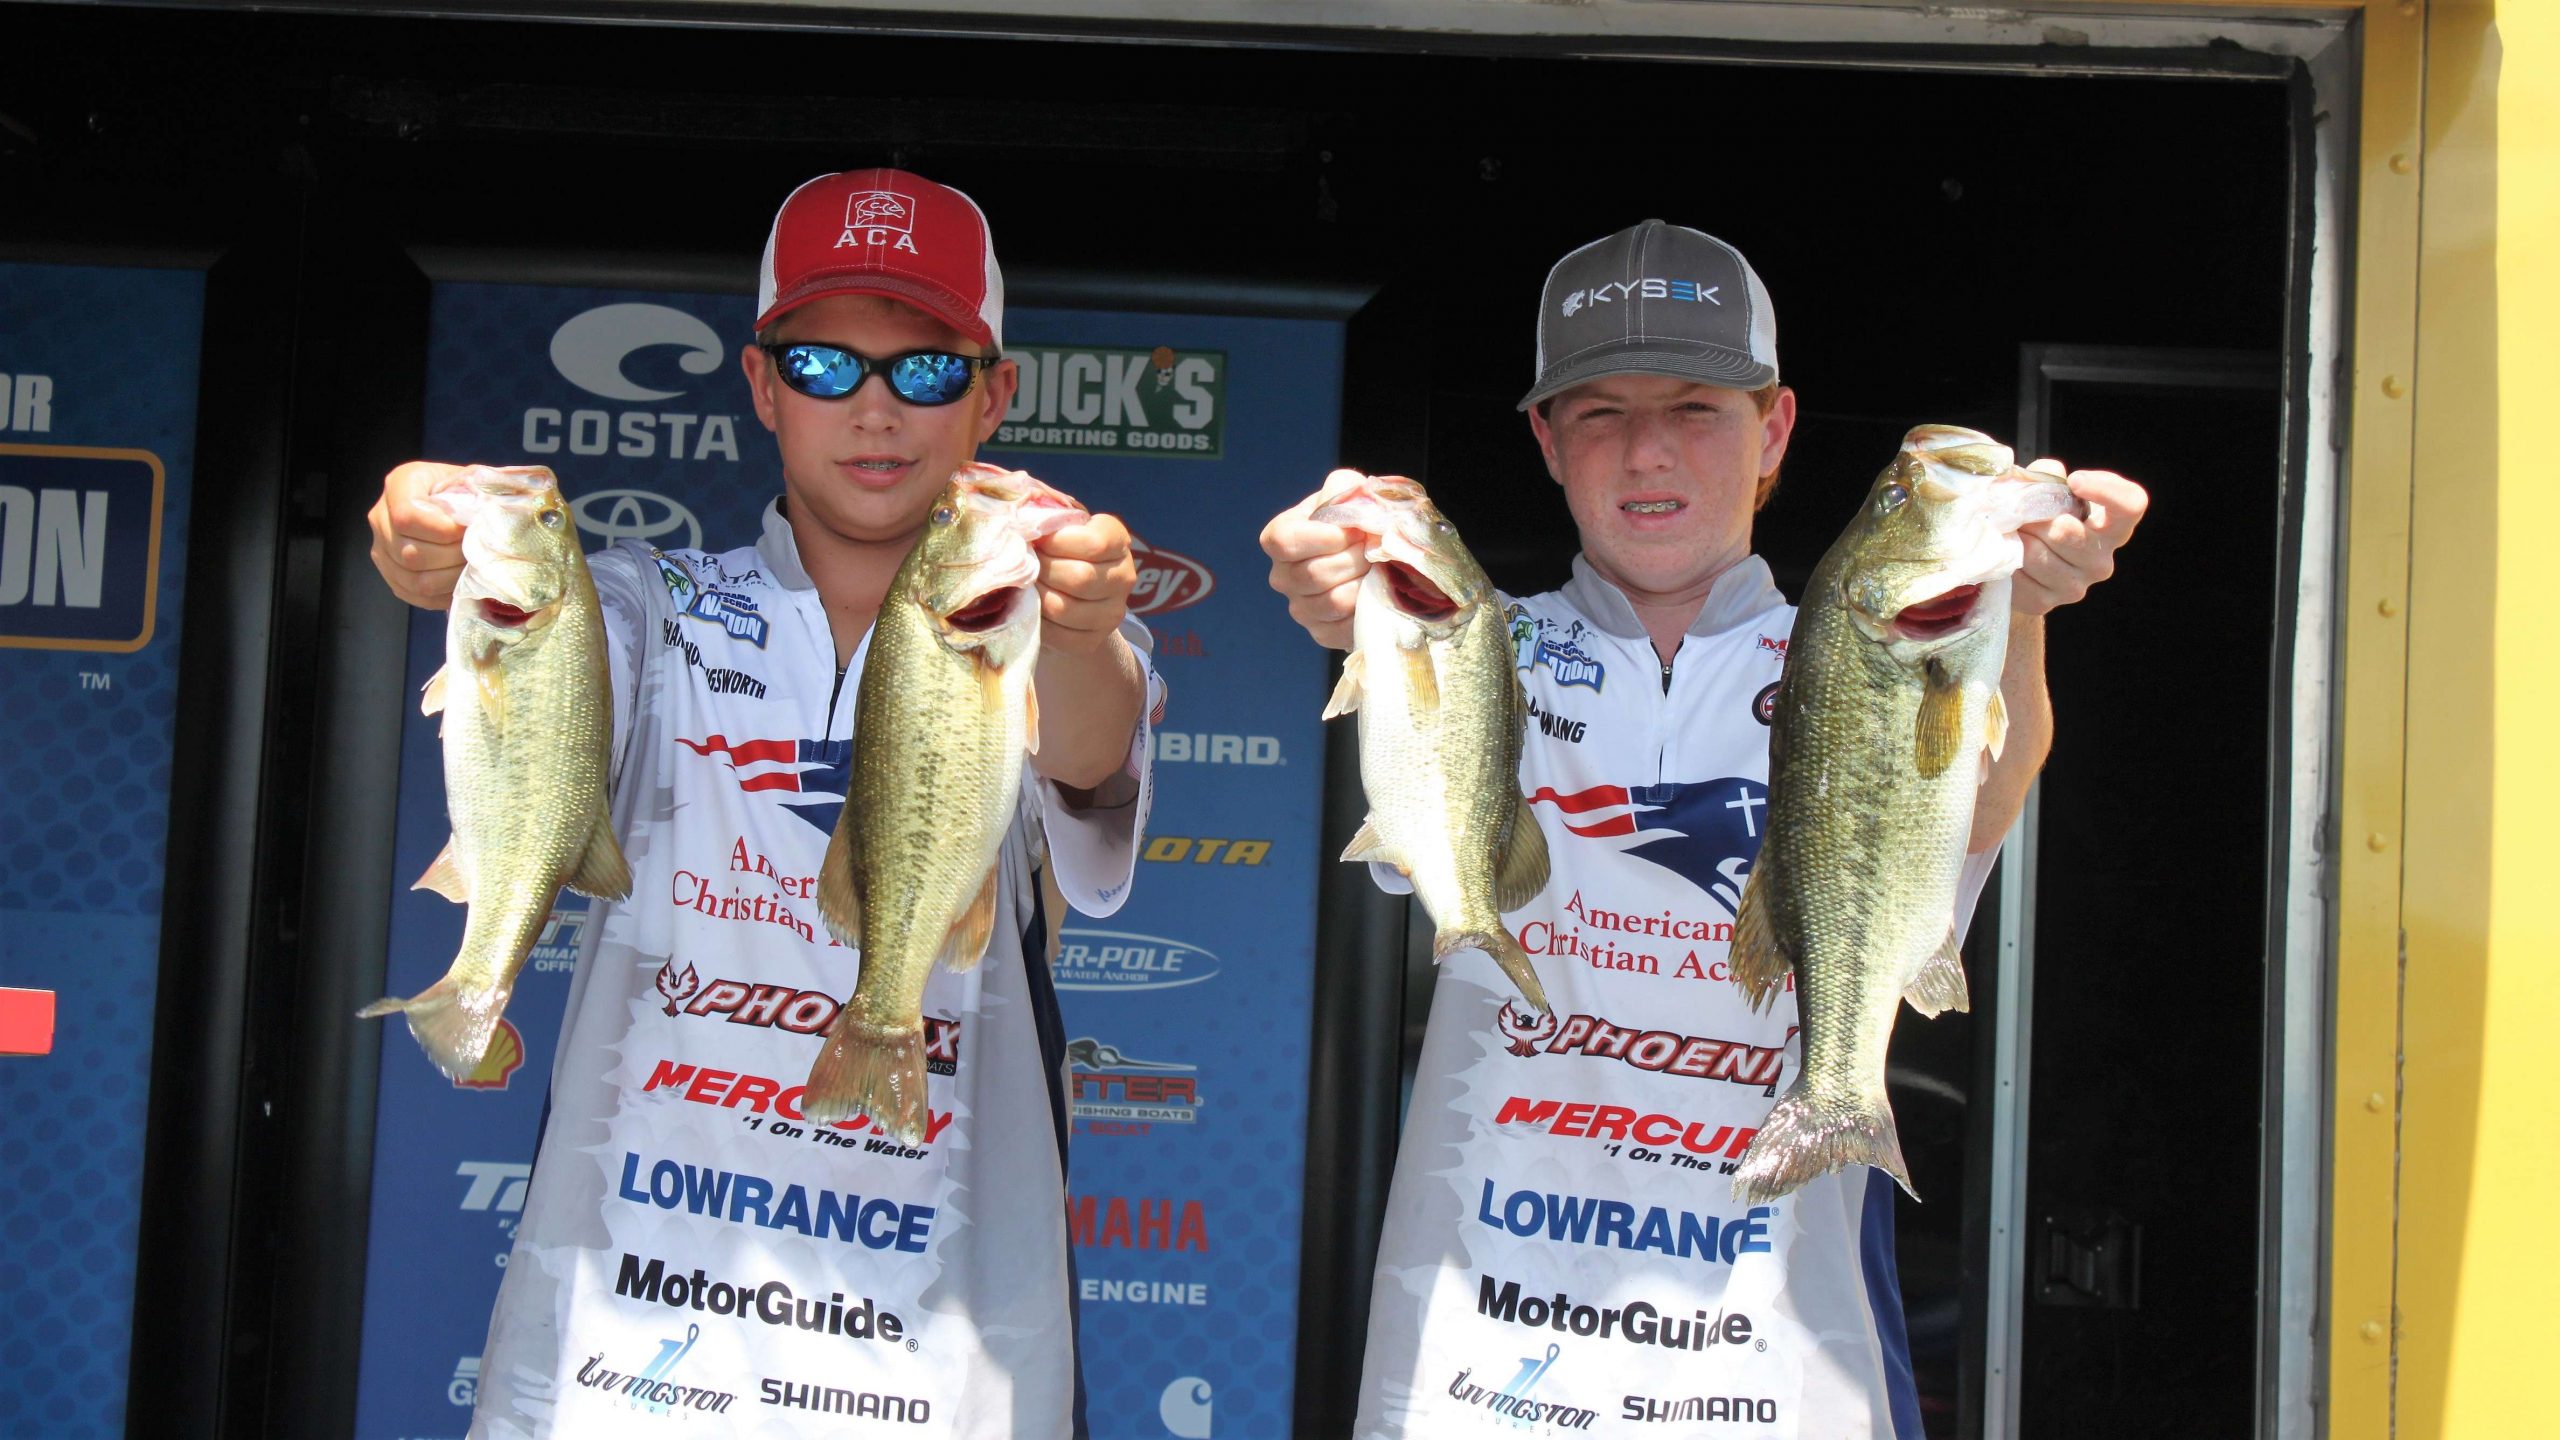  Miller Dowling and Chandlar Hollingsworth of Alabama are in seventh place with 9-3.
